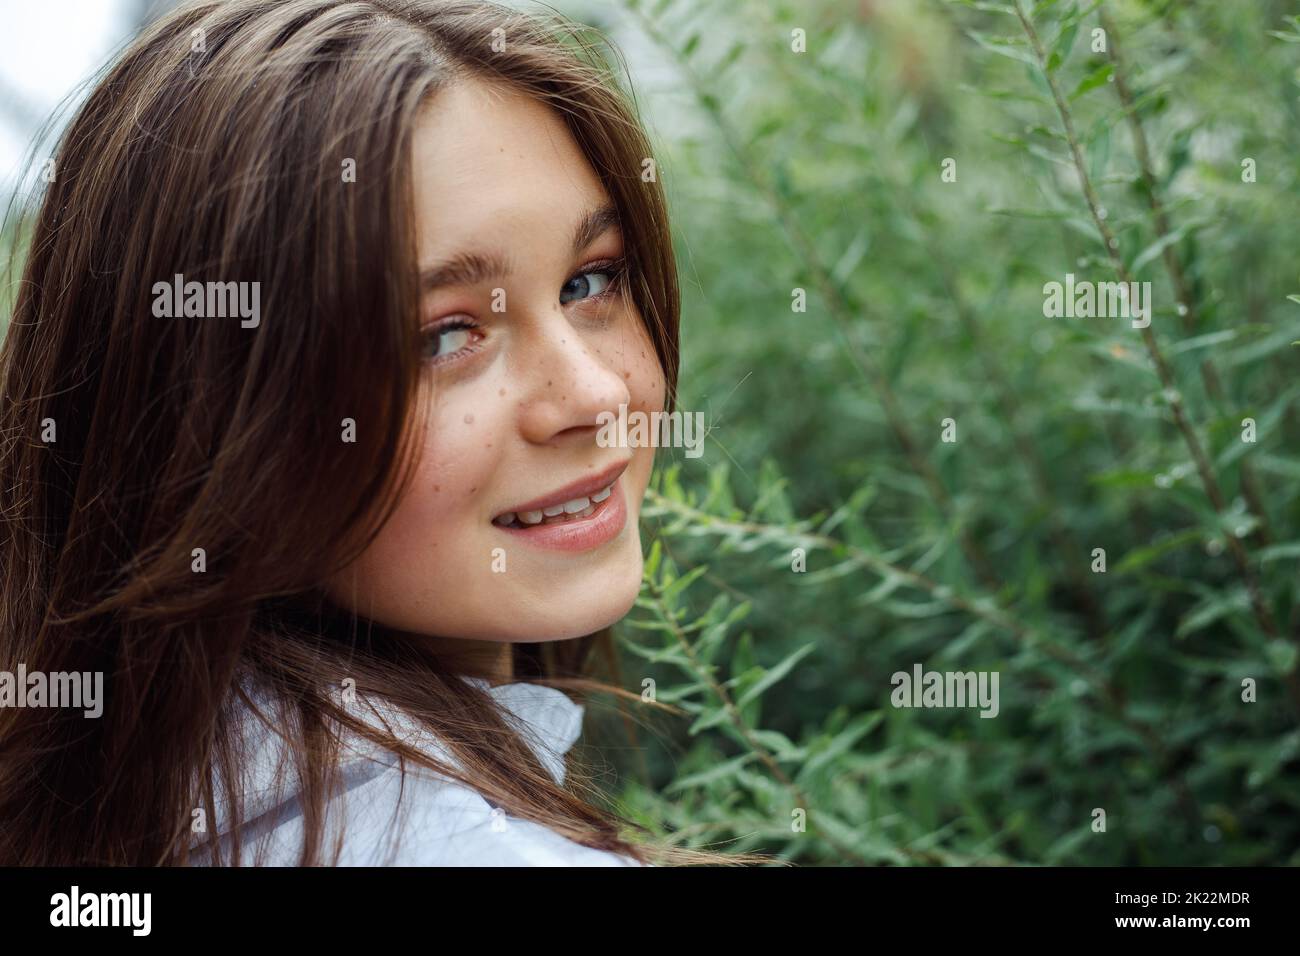 Portrait closeup of charming young girl with stylish makeup and freckles, smiling stand among branches of bushes with green leaves, nature background Stock Photo